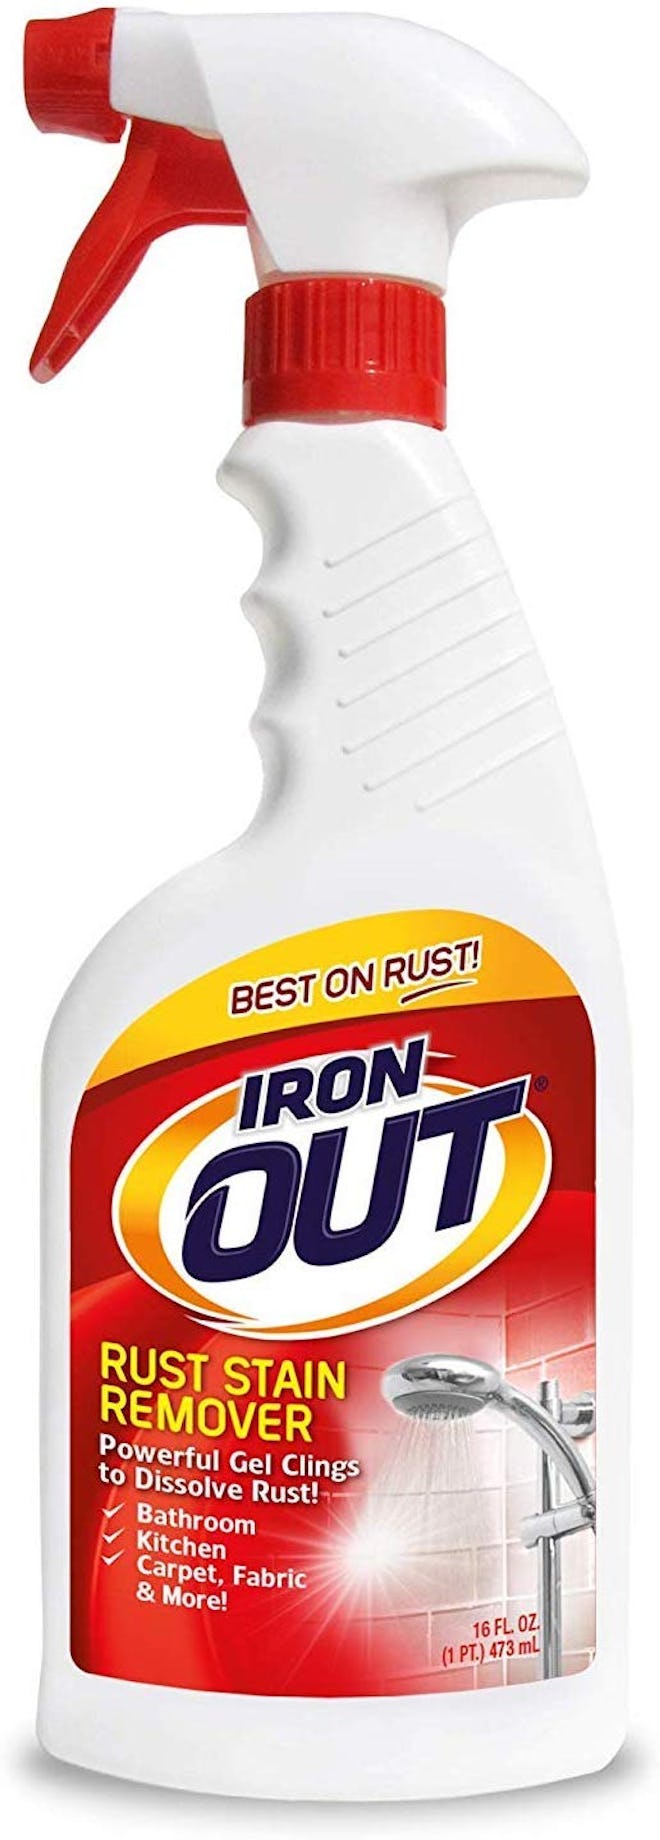 Iron OUT Rust Stain Remover Spray Gel (16 Ounces)